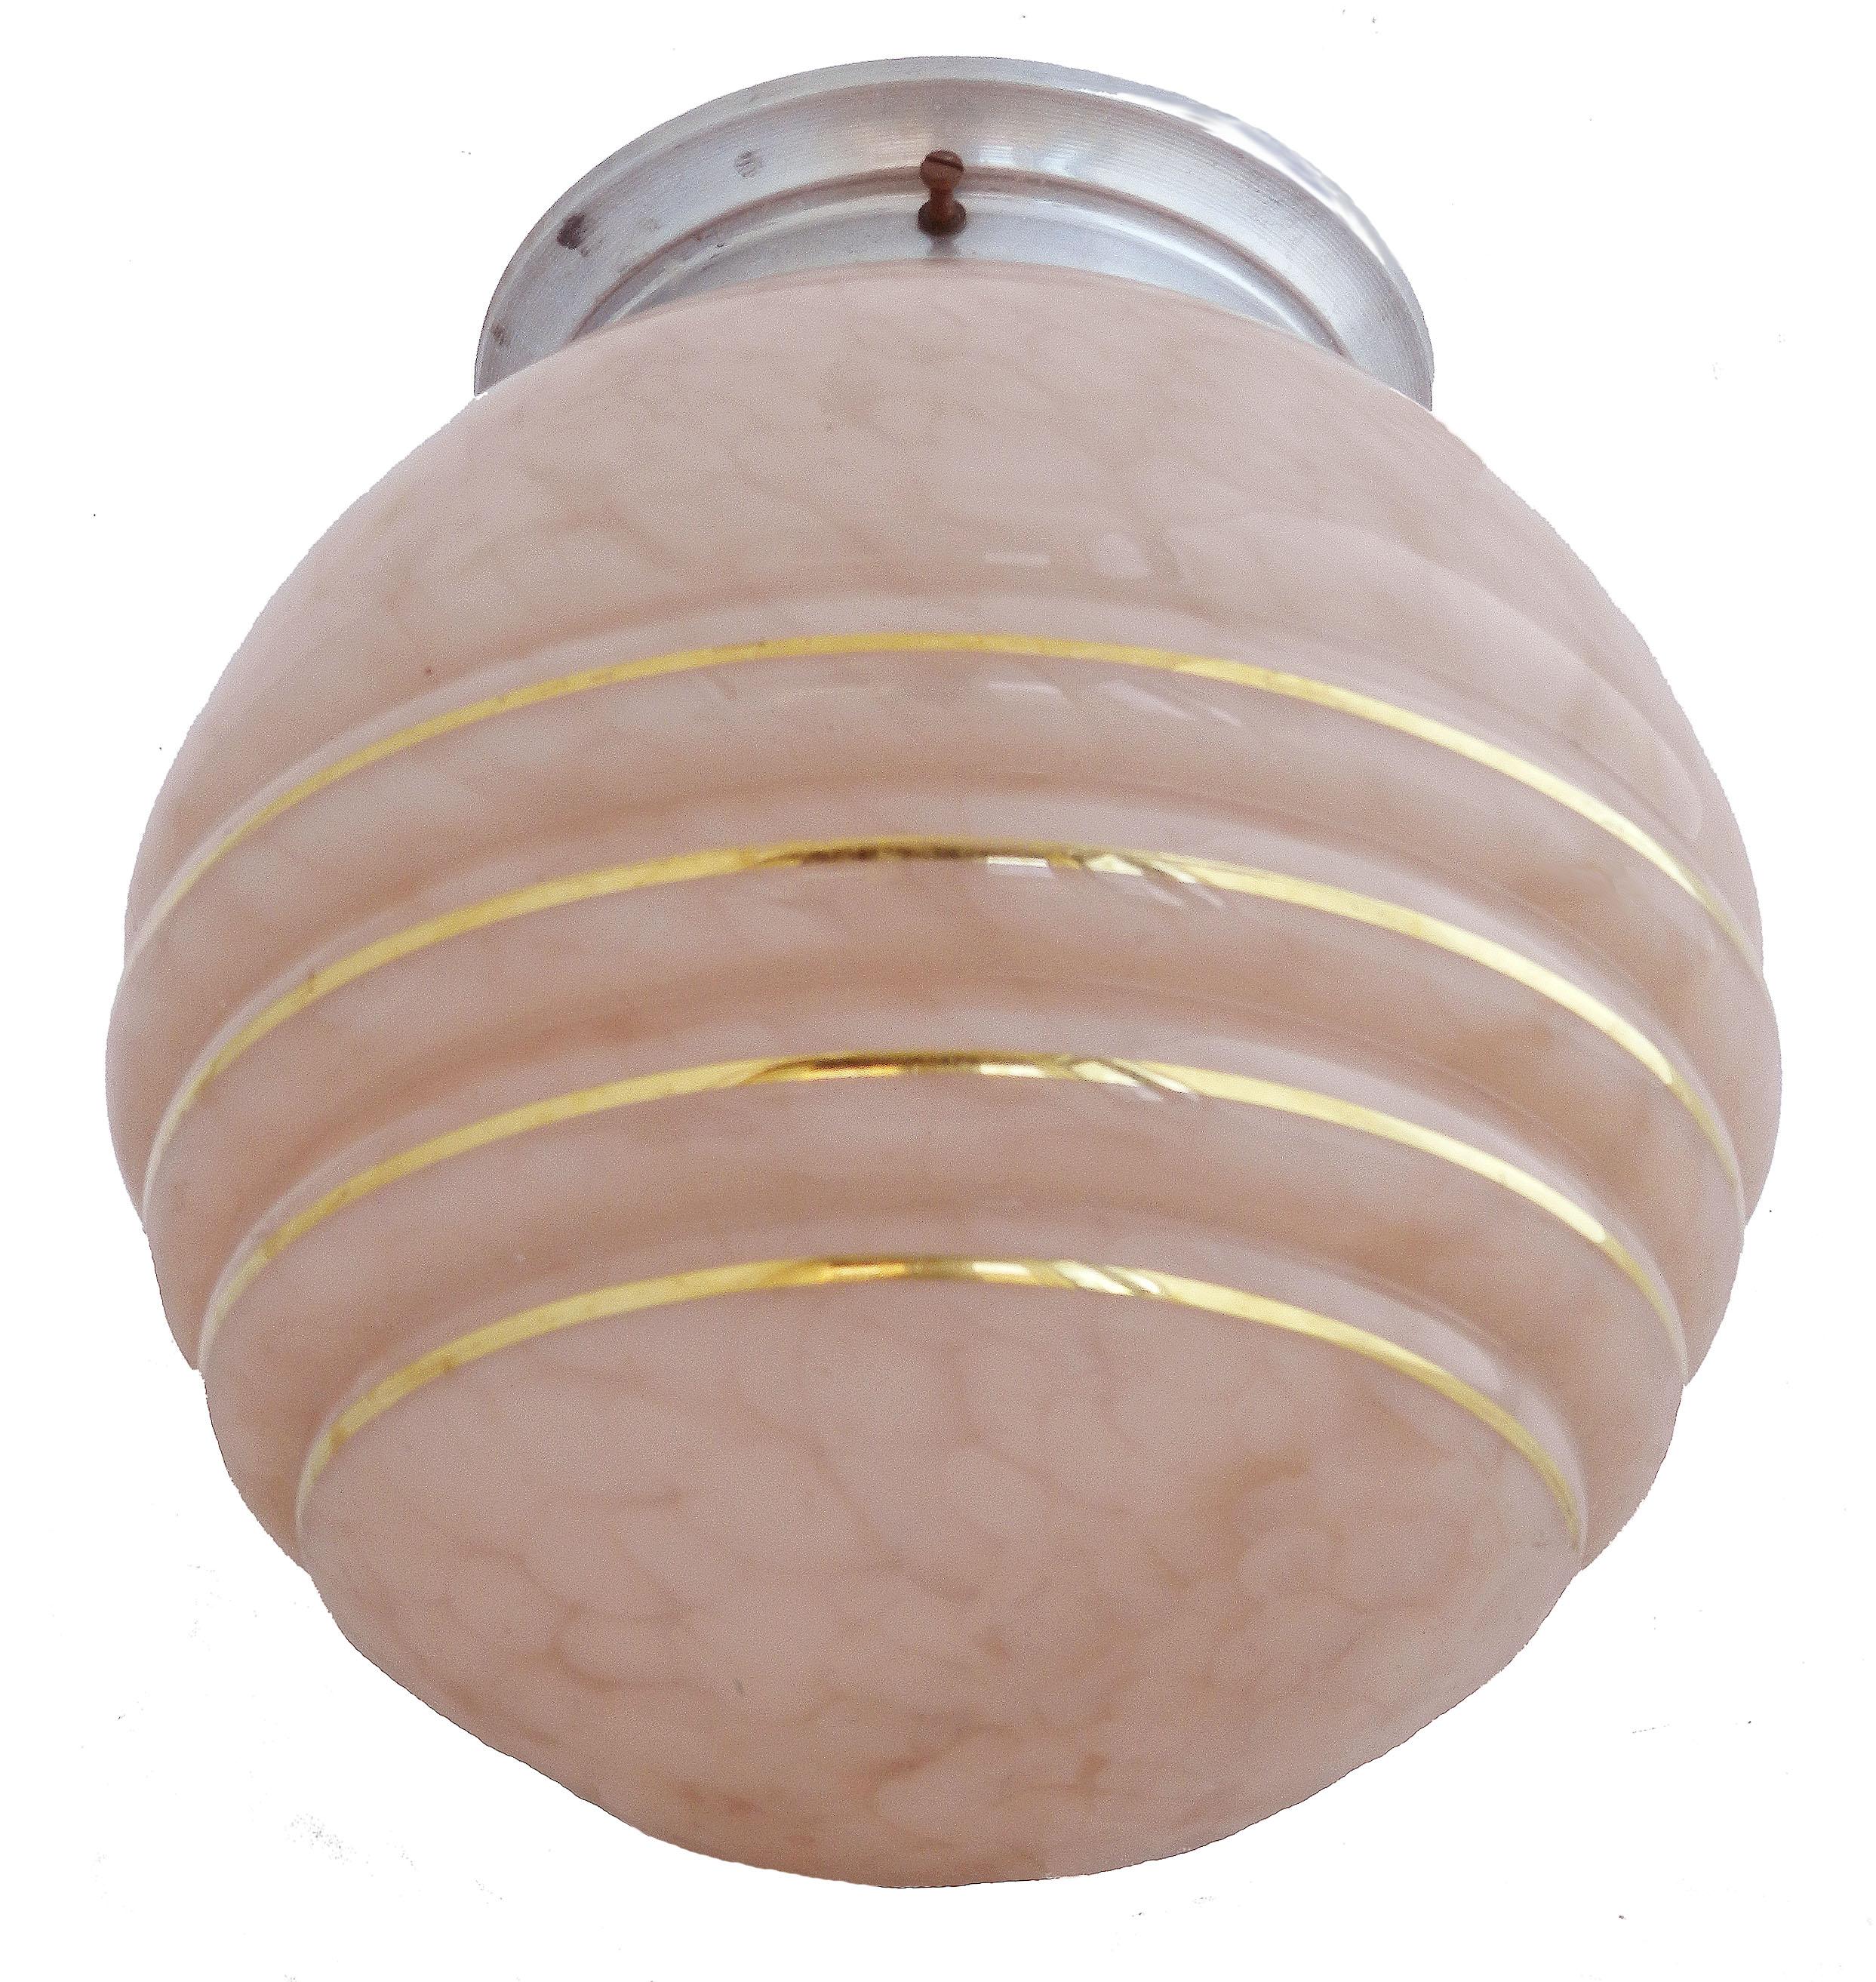 Art Deco light dusky pink mottled glass original shade on a chrome mount
In good original condition with no losses to glass.
This will be re-wired and tested to USA or UK and European standards ready to install.


